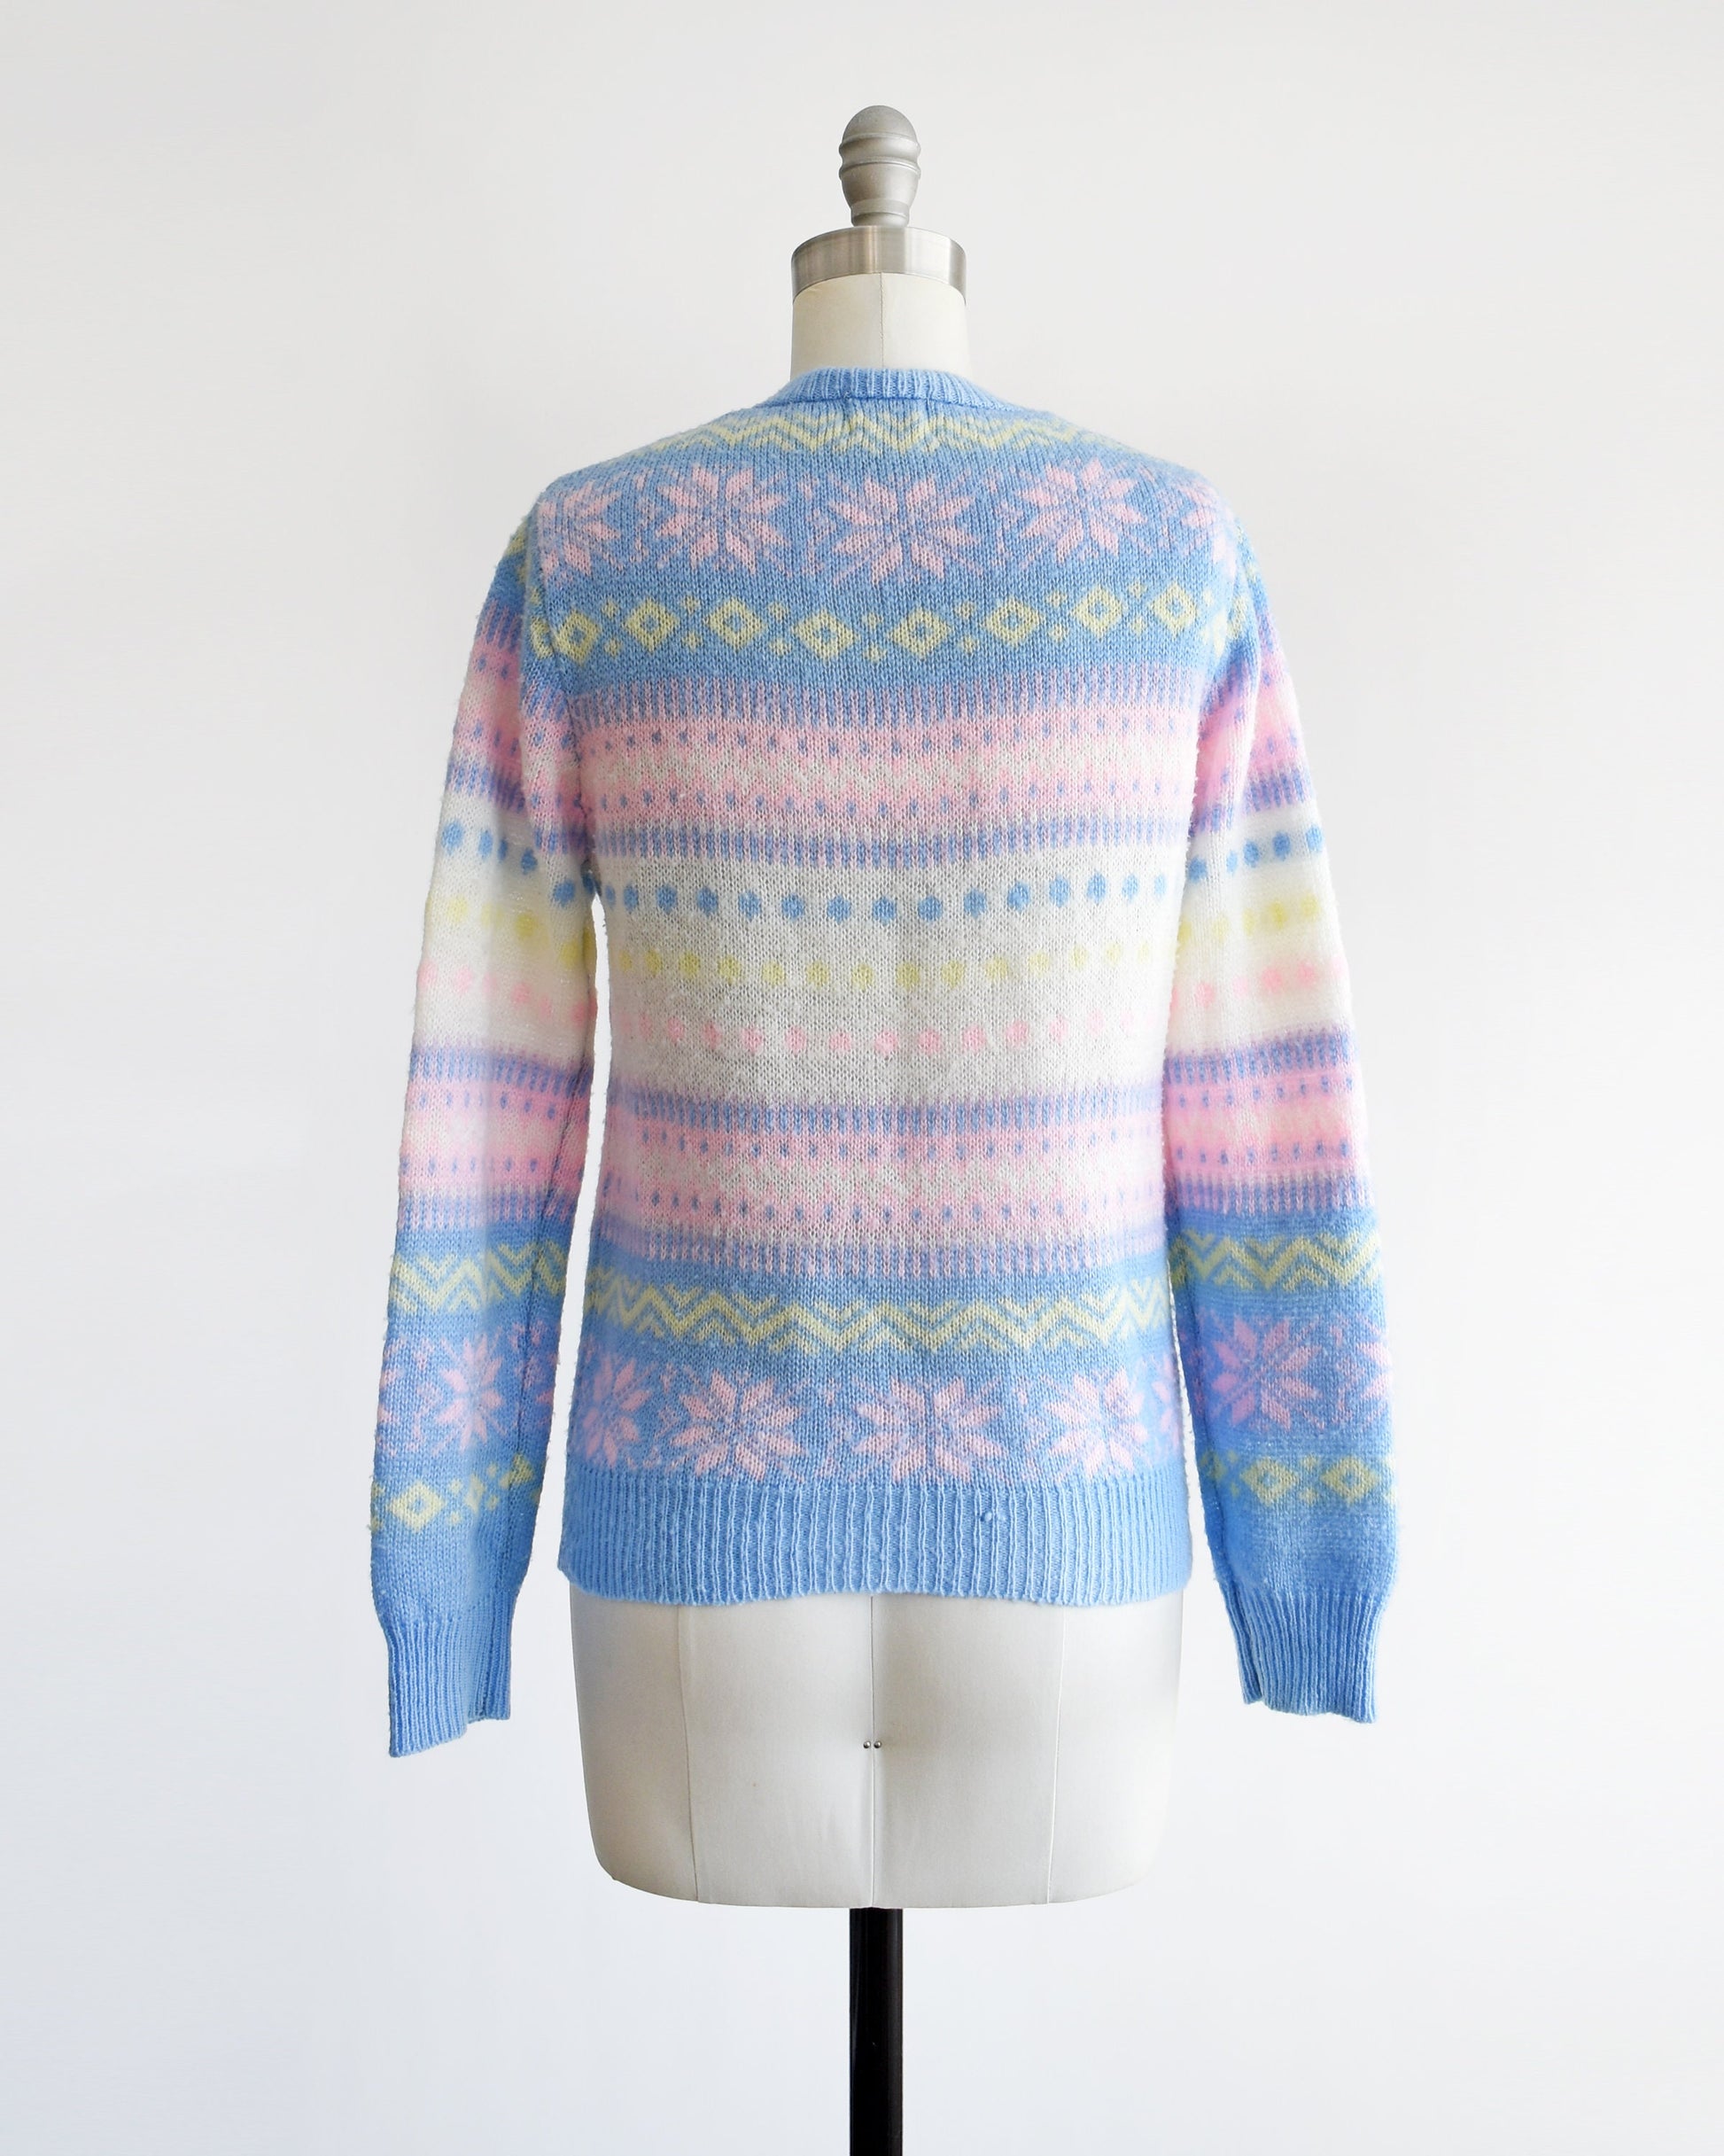 Back view of a vintage 80s pastel striped sweater thats blue, pink, yellow, and white, and at has a snowflake and geometric stripe print on a dress form.